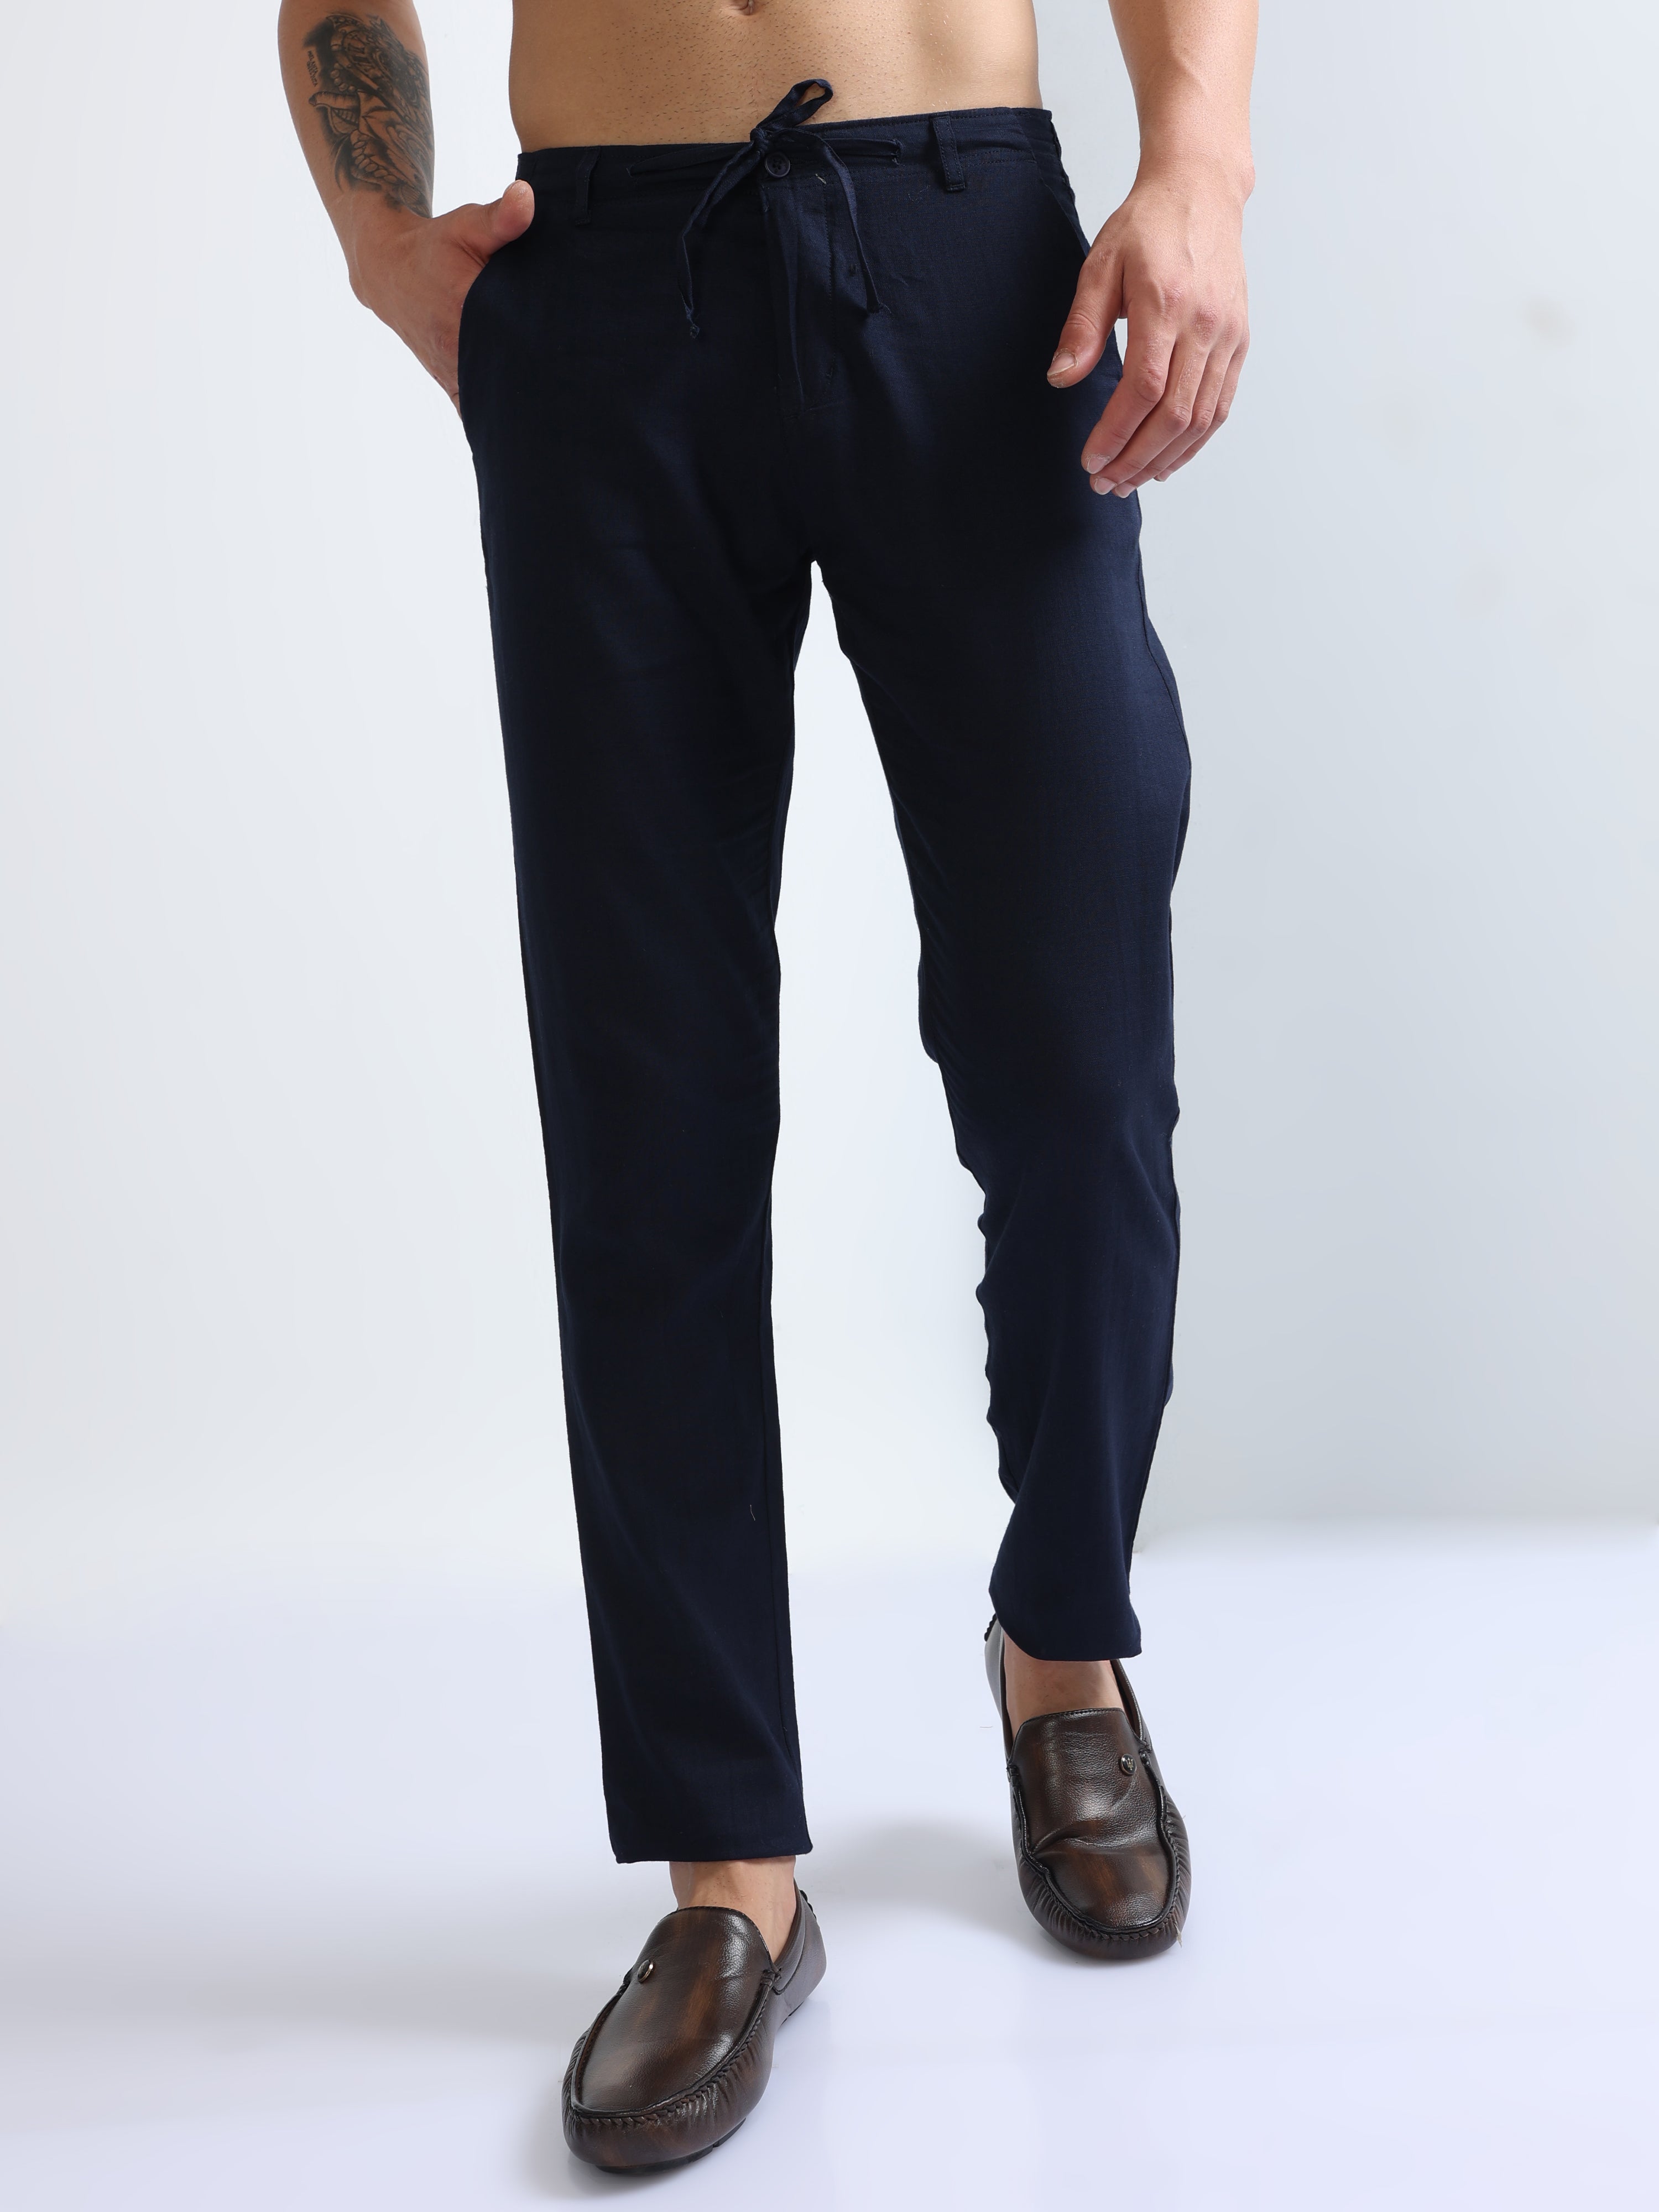 Buy Navy Blue Trousers & Pants for Men by ProEarth Online | Ajio.com